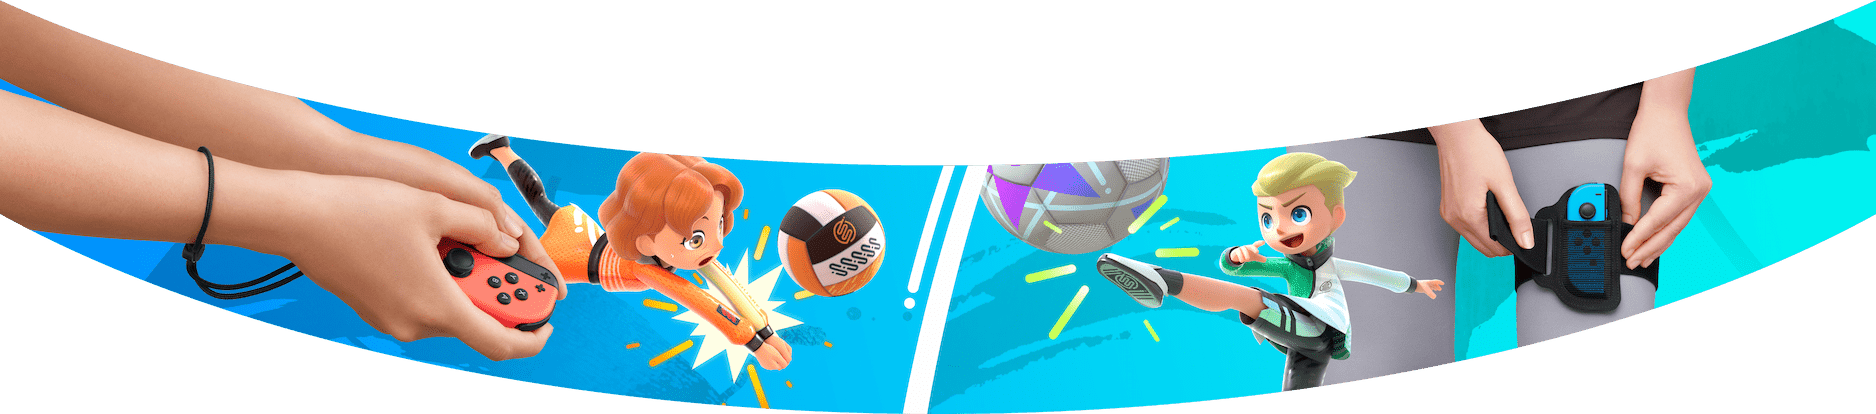 Nintendo Switch™ Sports for Nintendo Switch - Nintendo Official Site